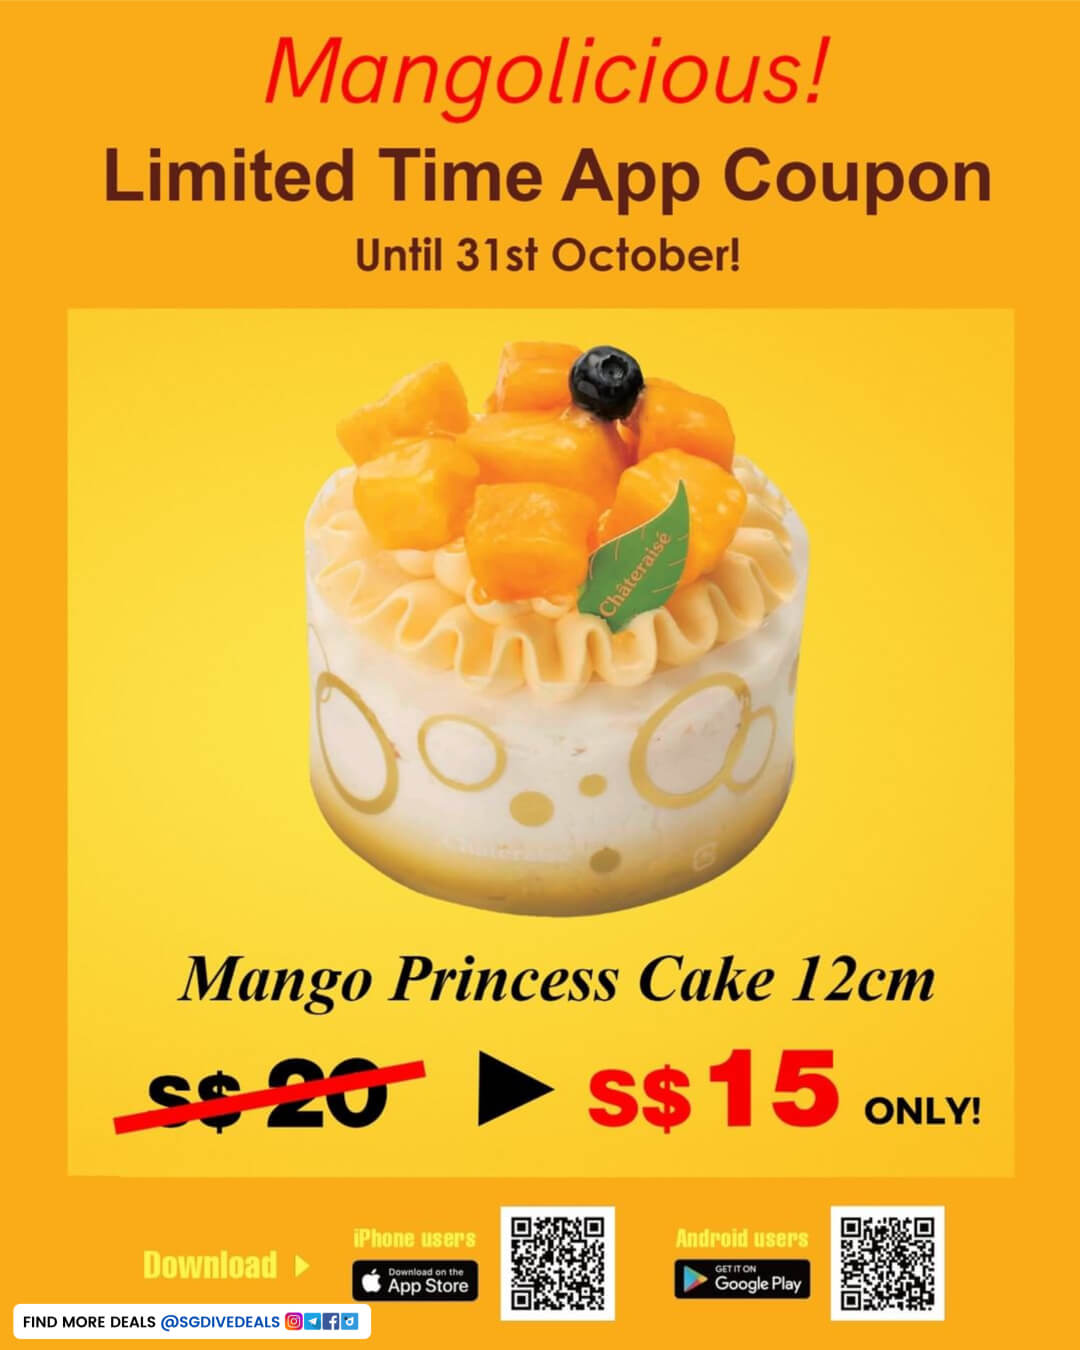 Chateraise,Get 25% off from our Mango Princess Cake